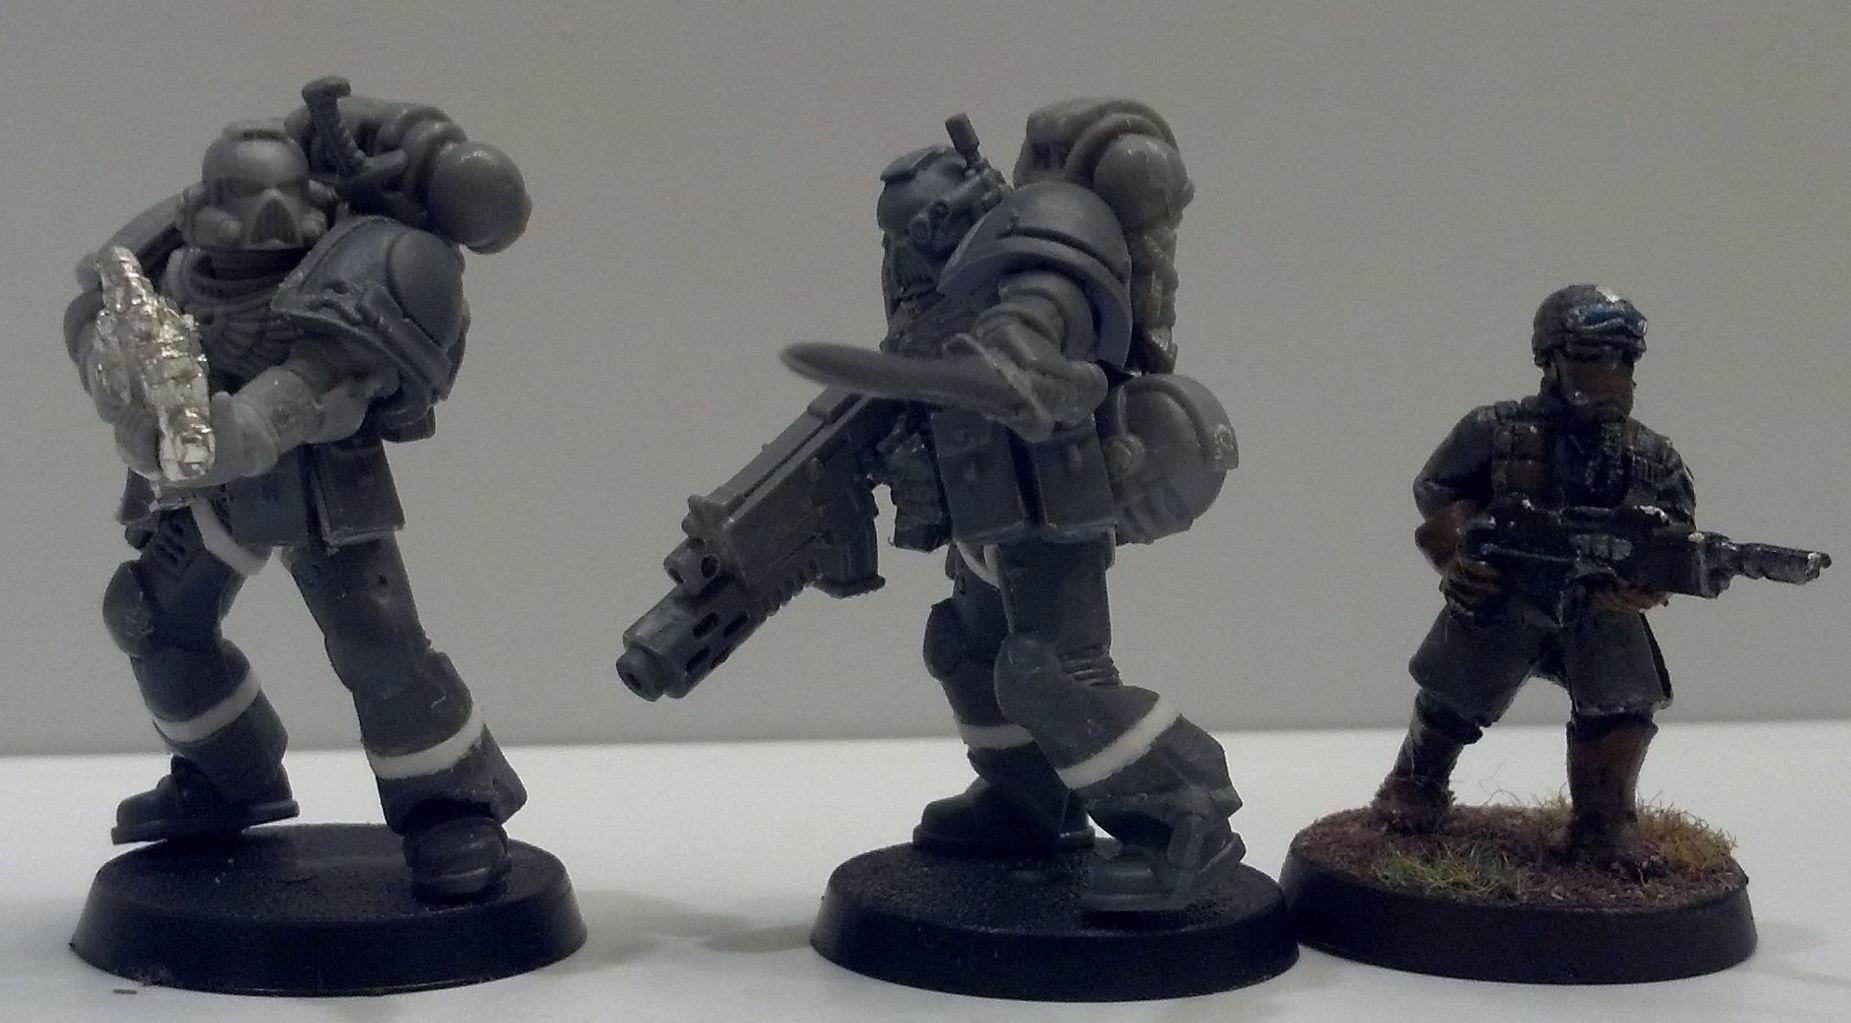 Combimelta, Combiweapon, Conversion, Magnet, Posing, Sergeant, Space Marines, Tall Scale